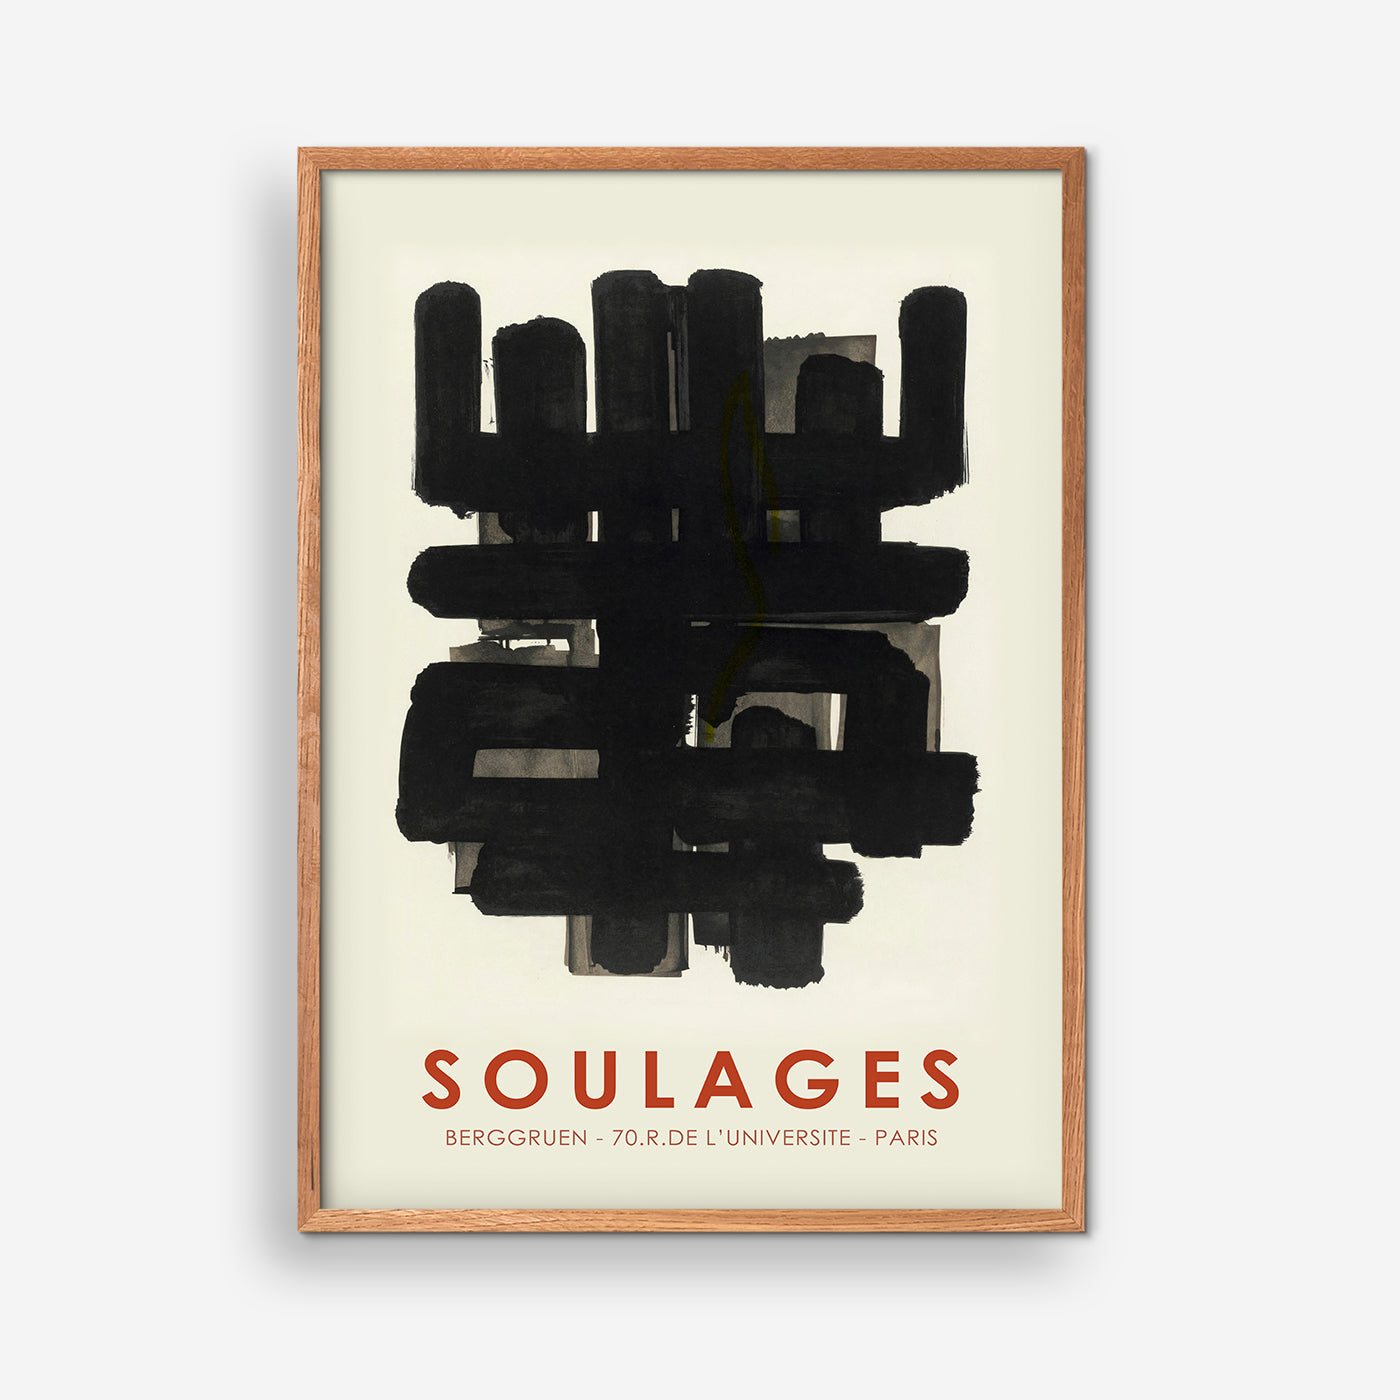 Exhibition poster - Soulages